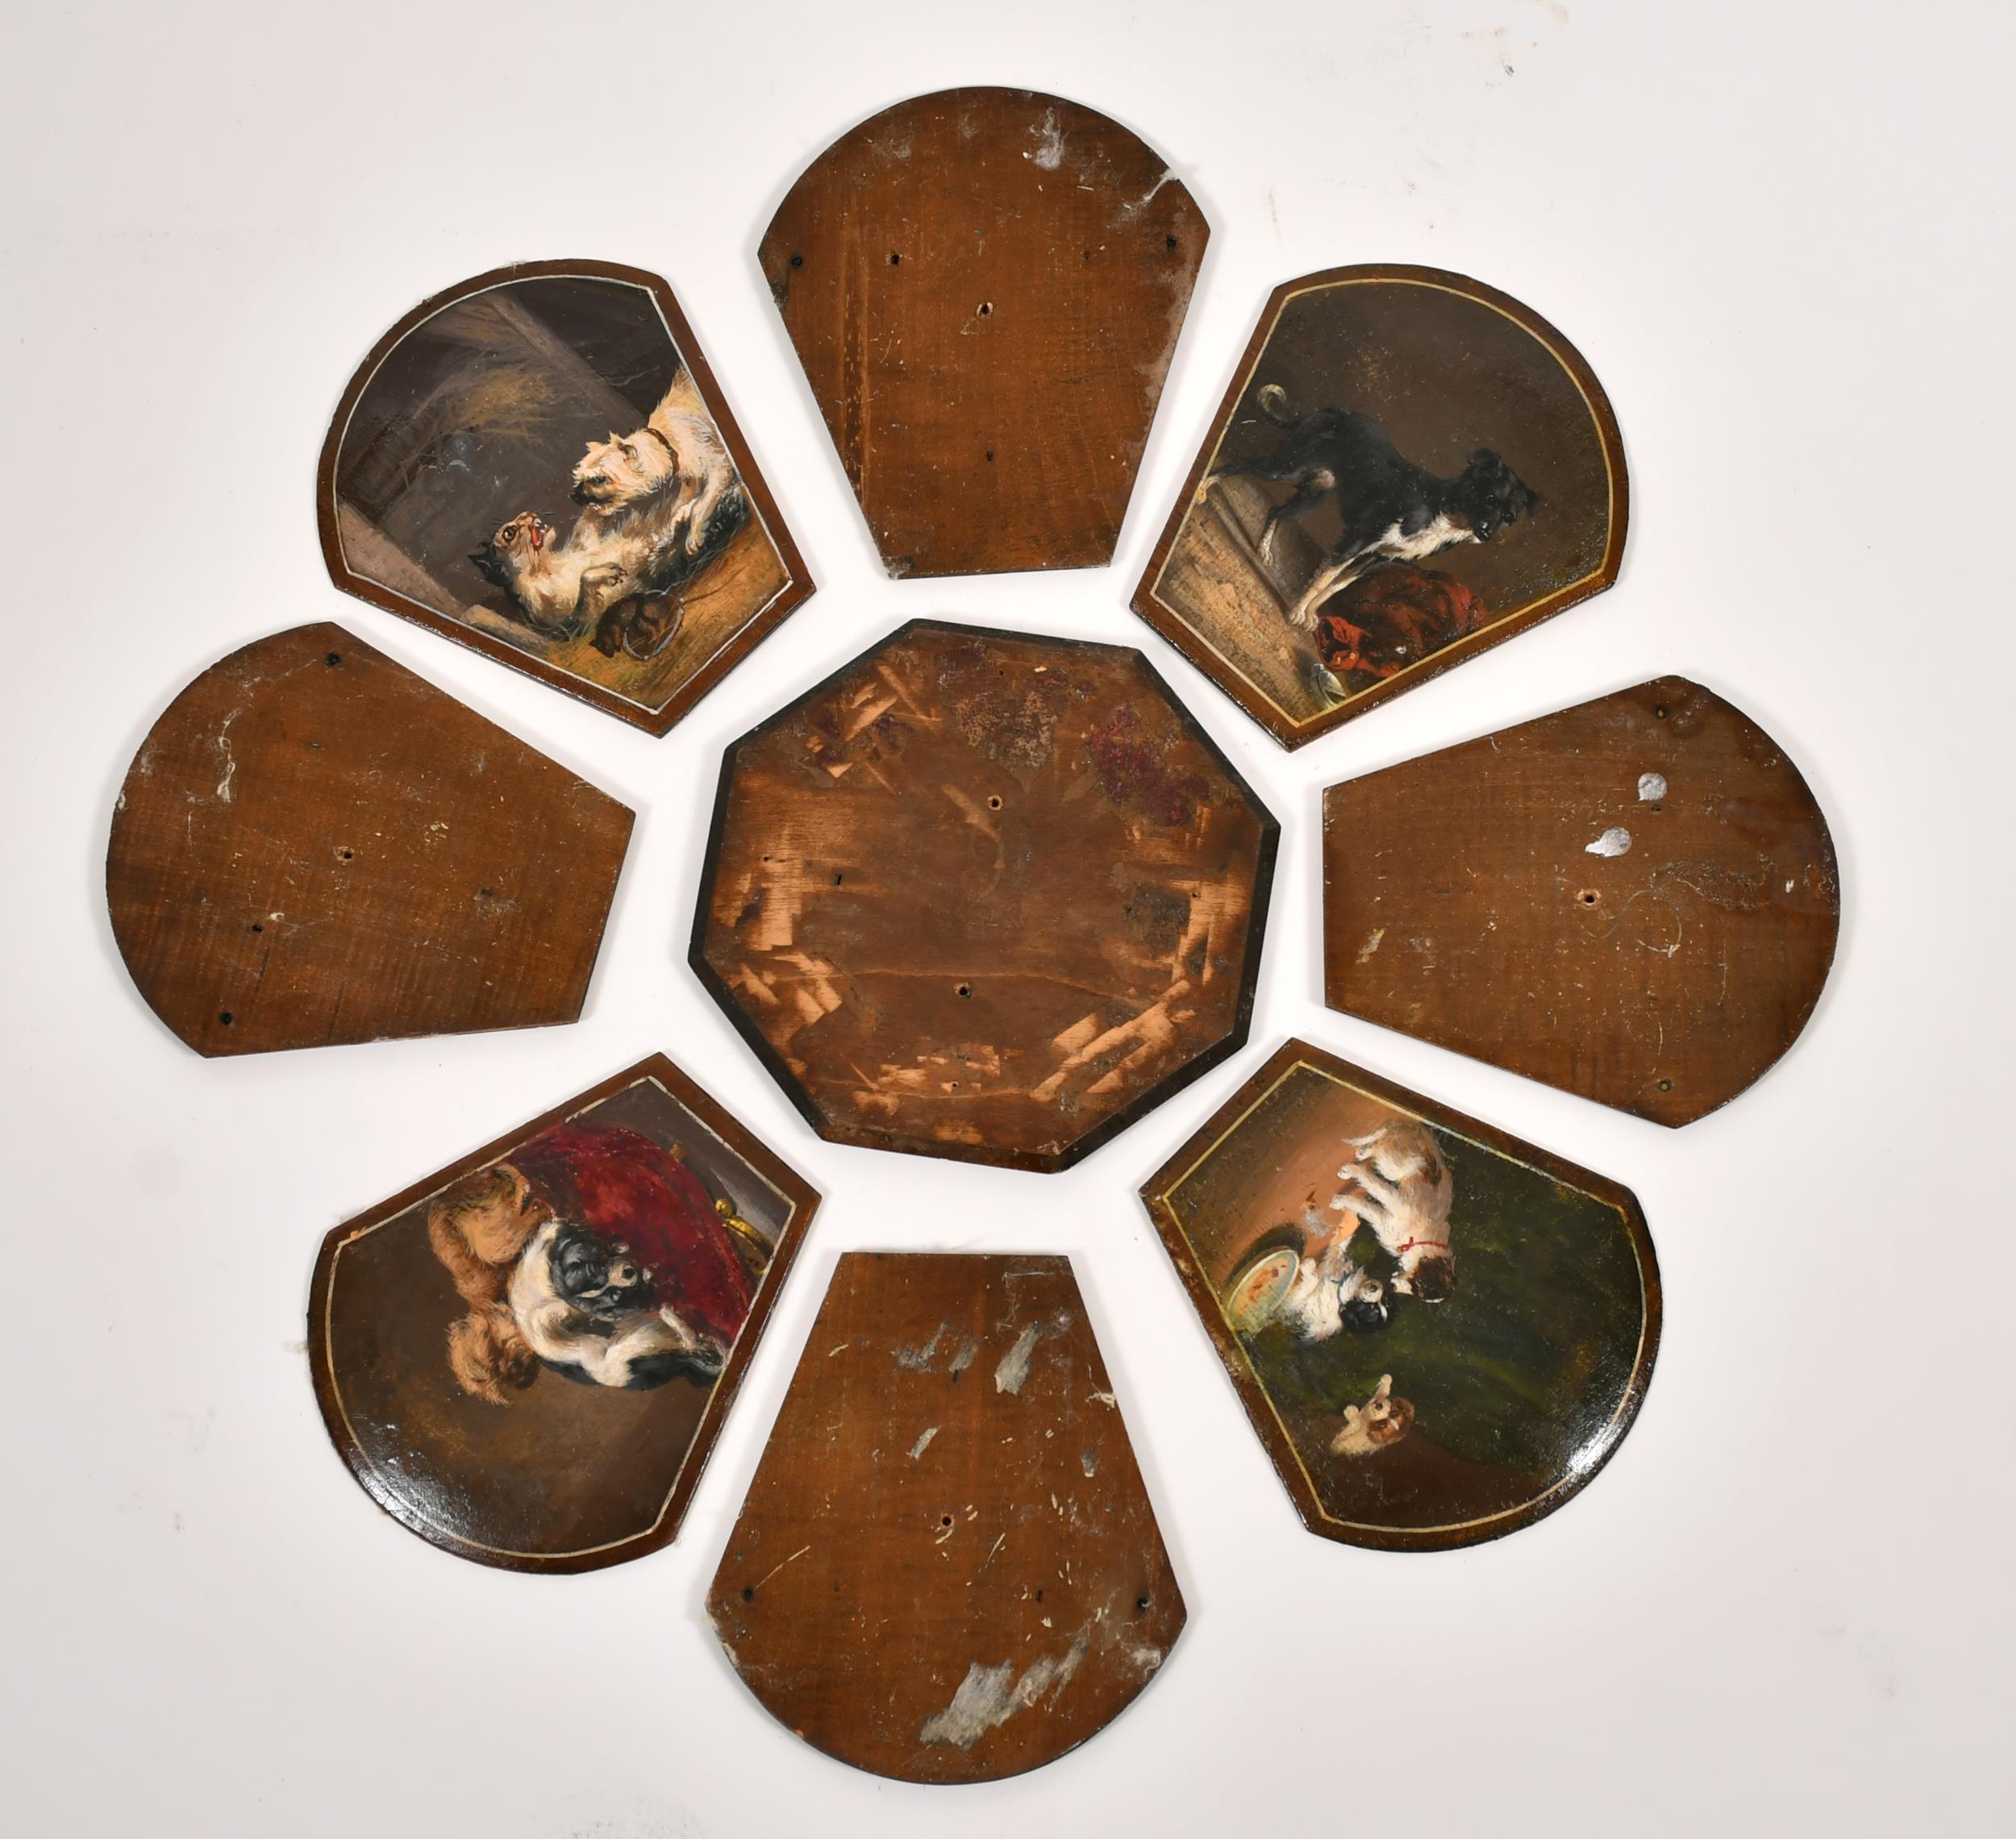 English School, 19th century 
Set of Nine (9) oil paintings depicting various dog breeds
oil on unframed panels, presumably either from a piece of furniture or a display. 
overall measurements approx: 13.5 x 13.5 inches
all in good condition, minor